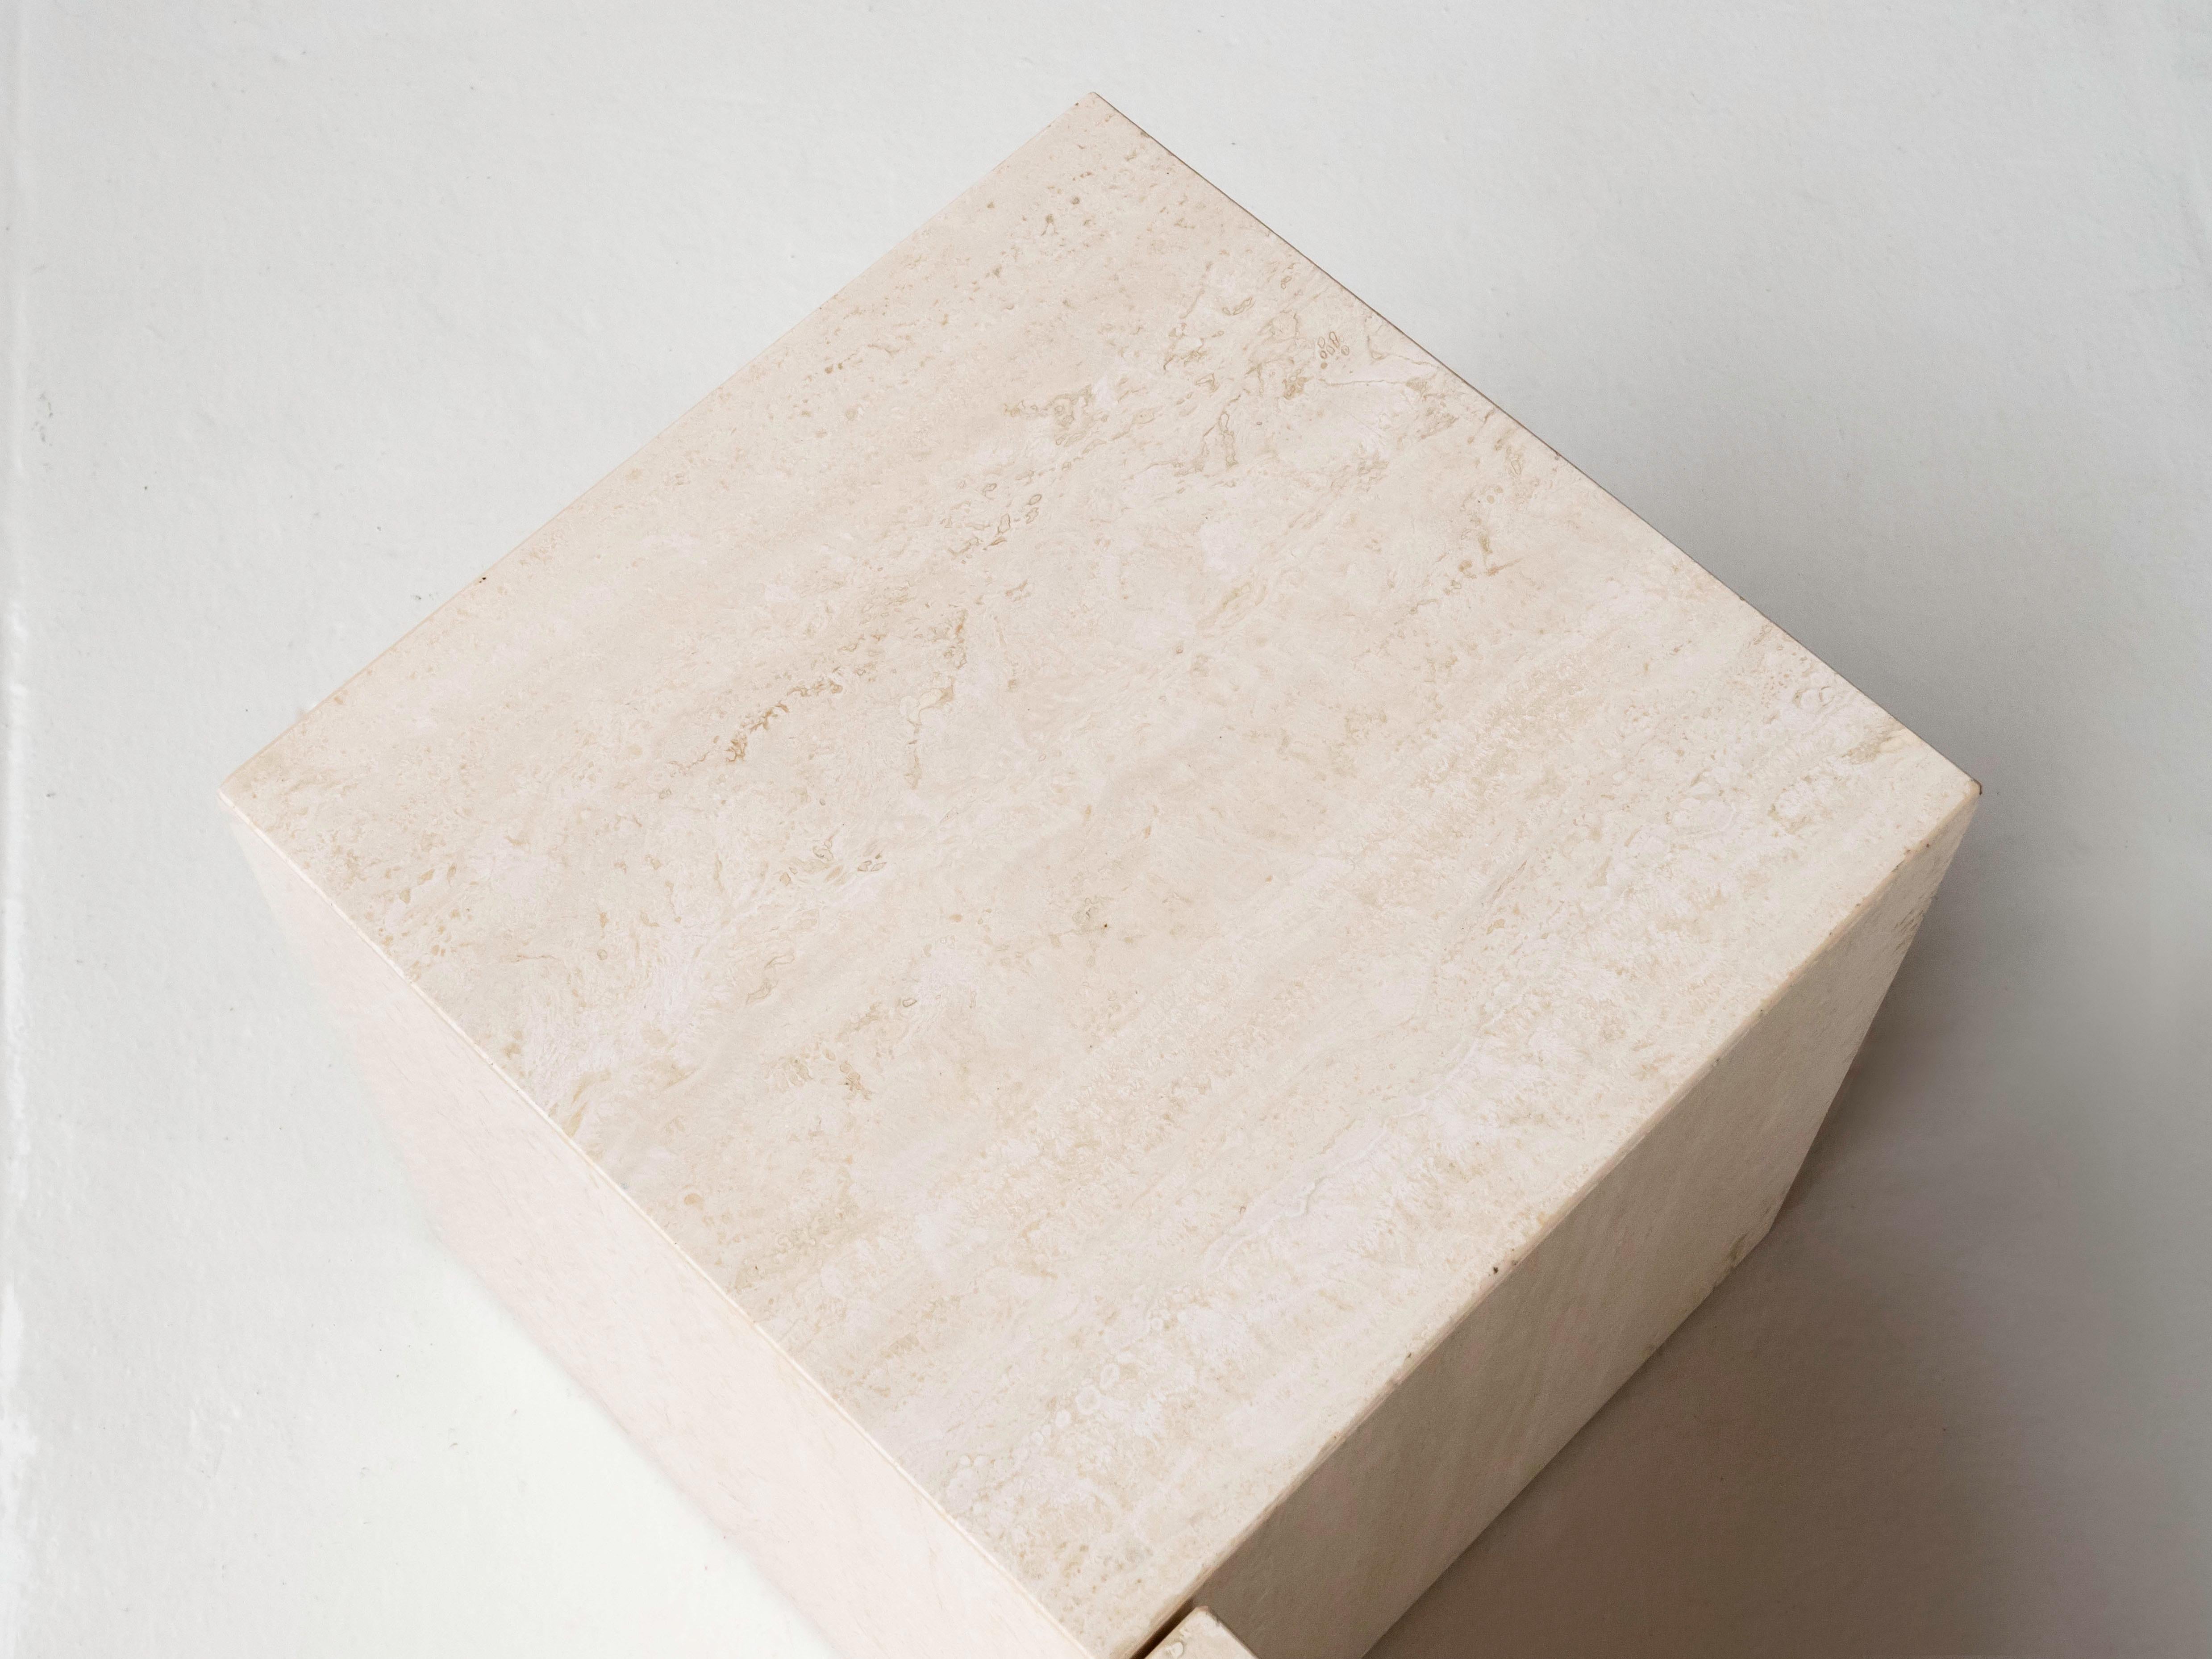 Late 20th Century Italian Travertine Set of 3 Cube Shaped Side Tables / Pedestals, Circa 1970's